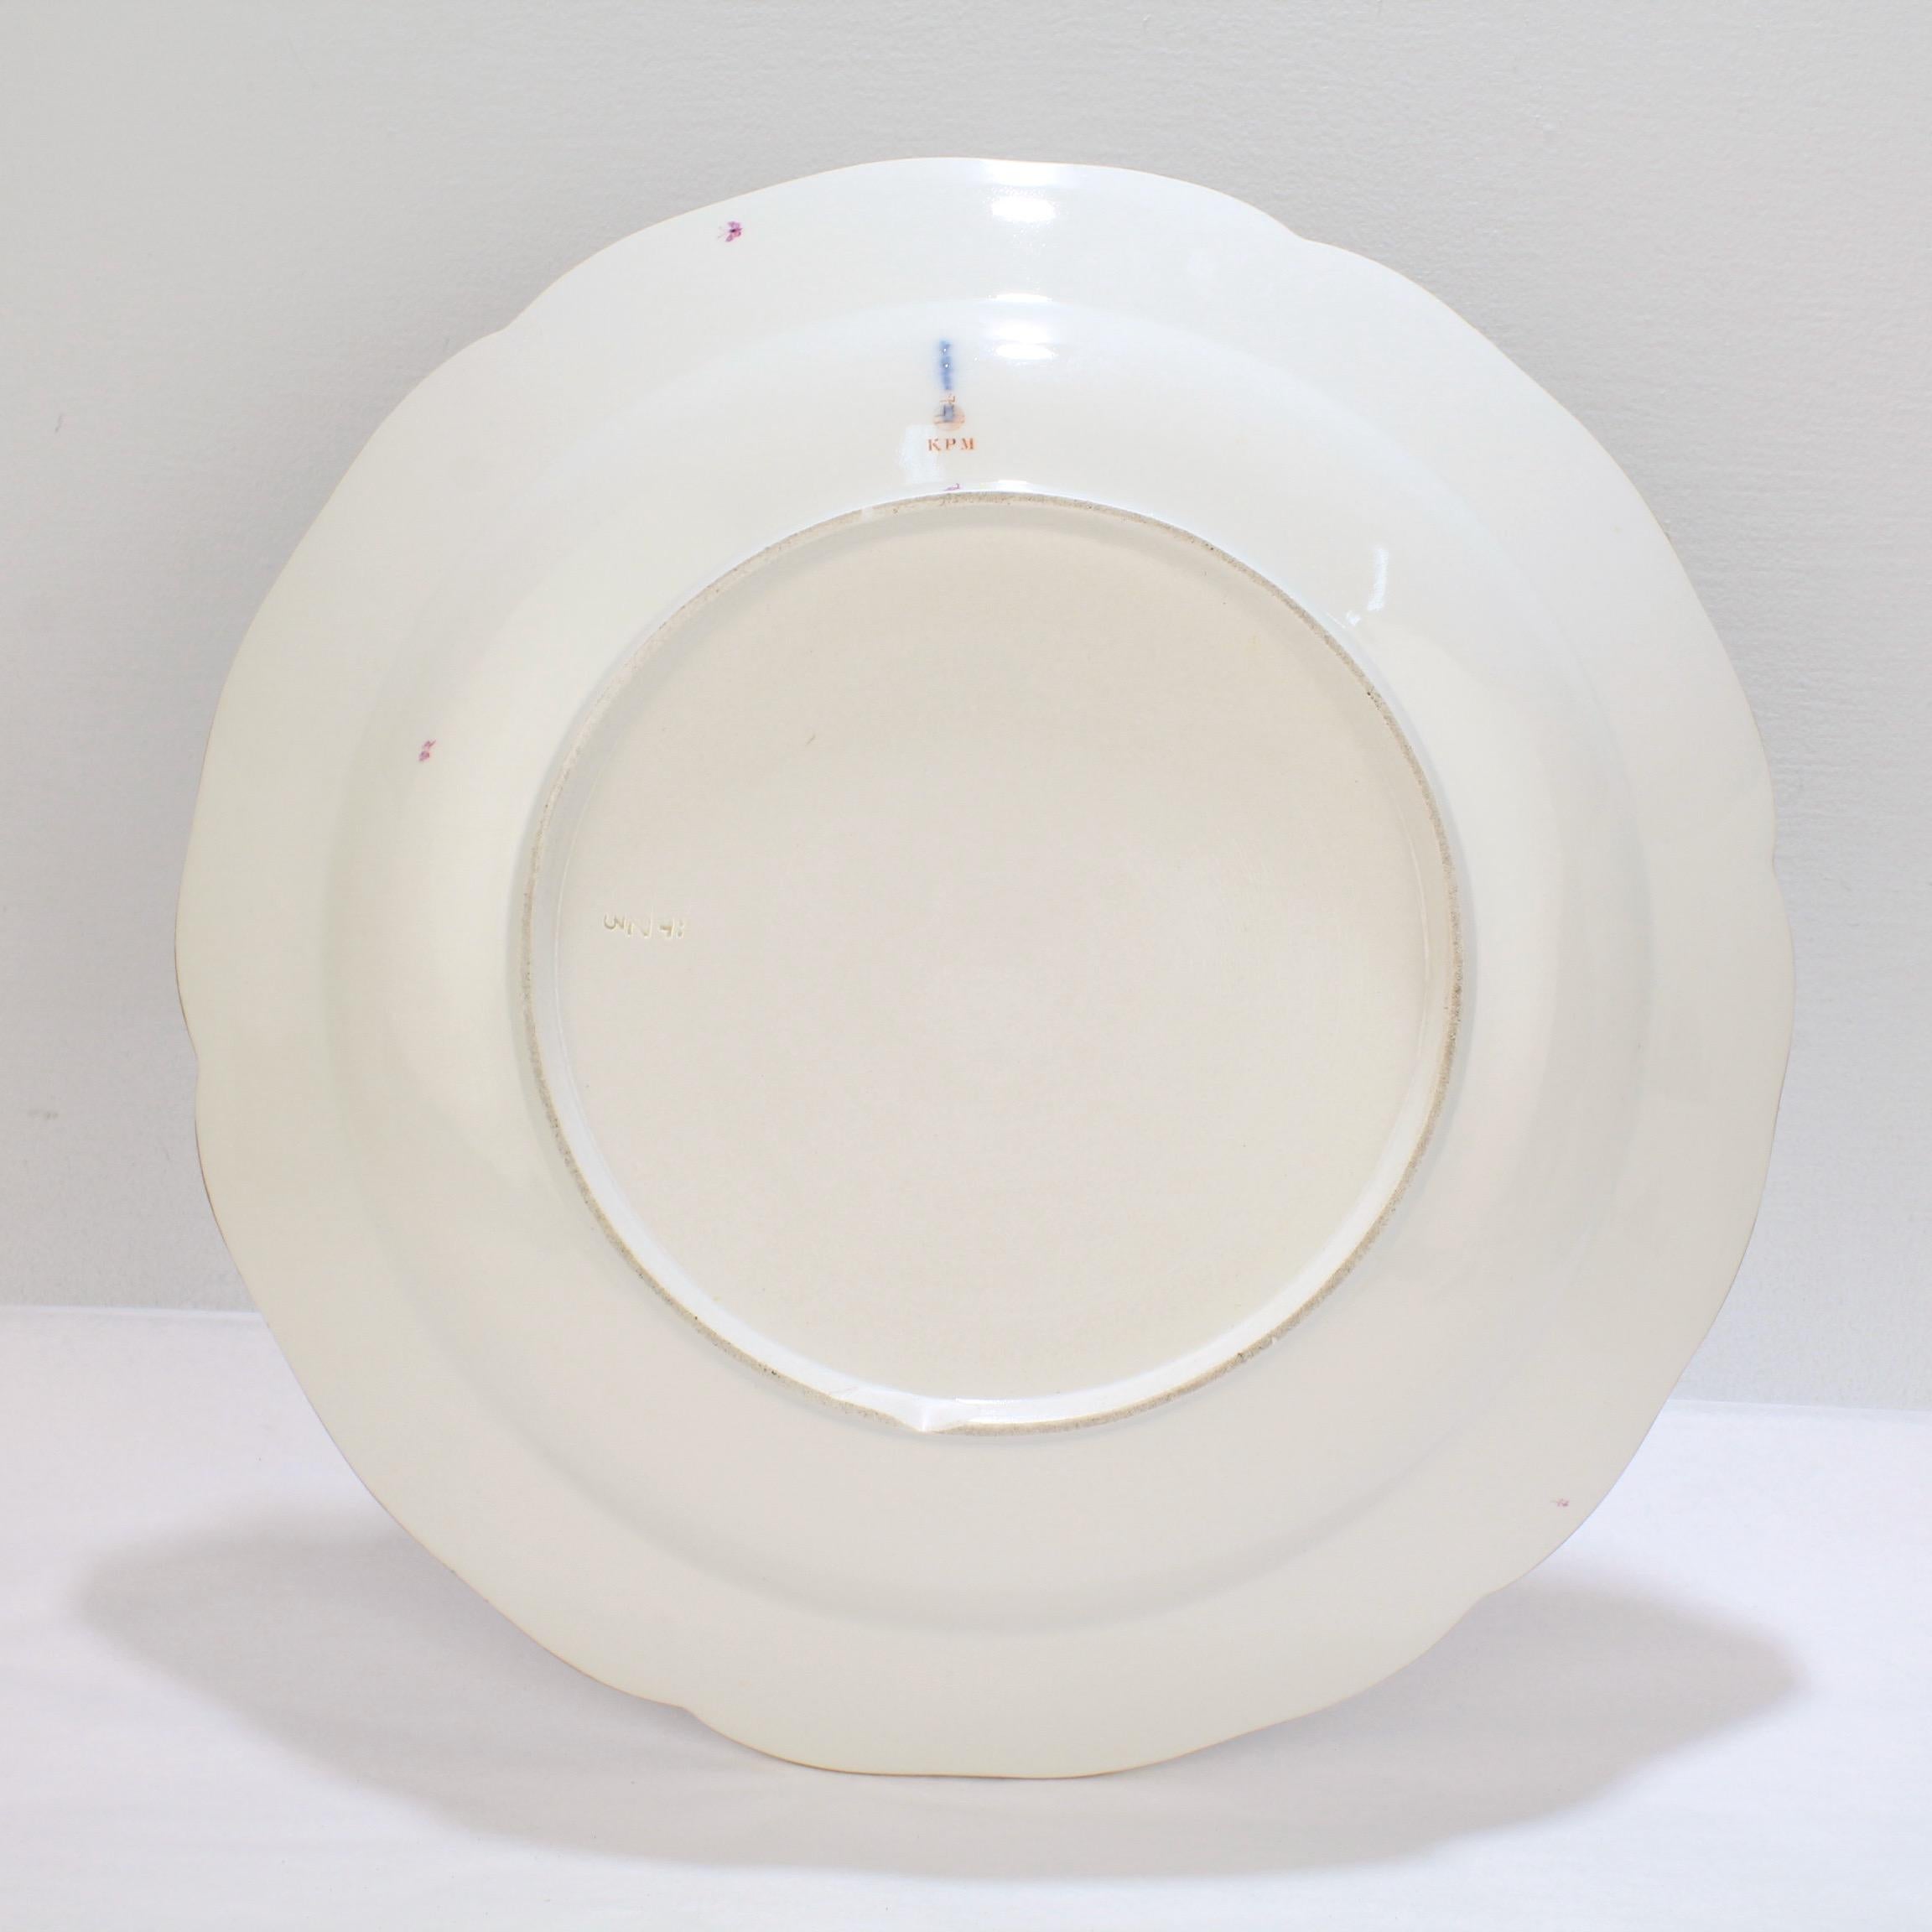 Large KPM Royal Berlin Porcelain Reliefzierat Pattern Charger Plate in Puce 1